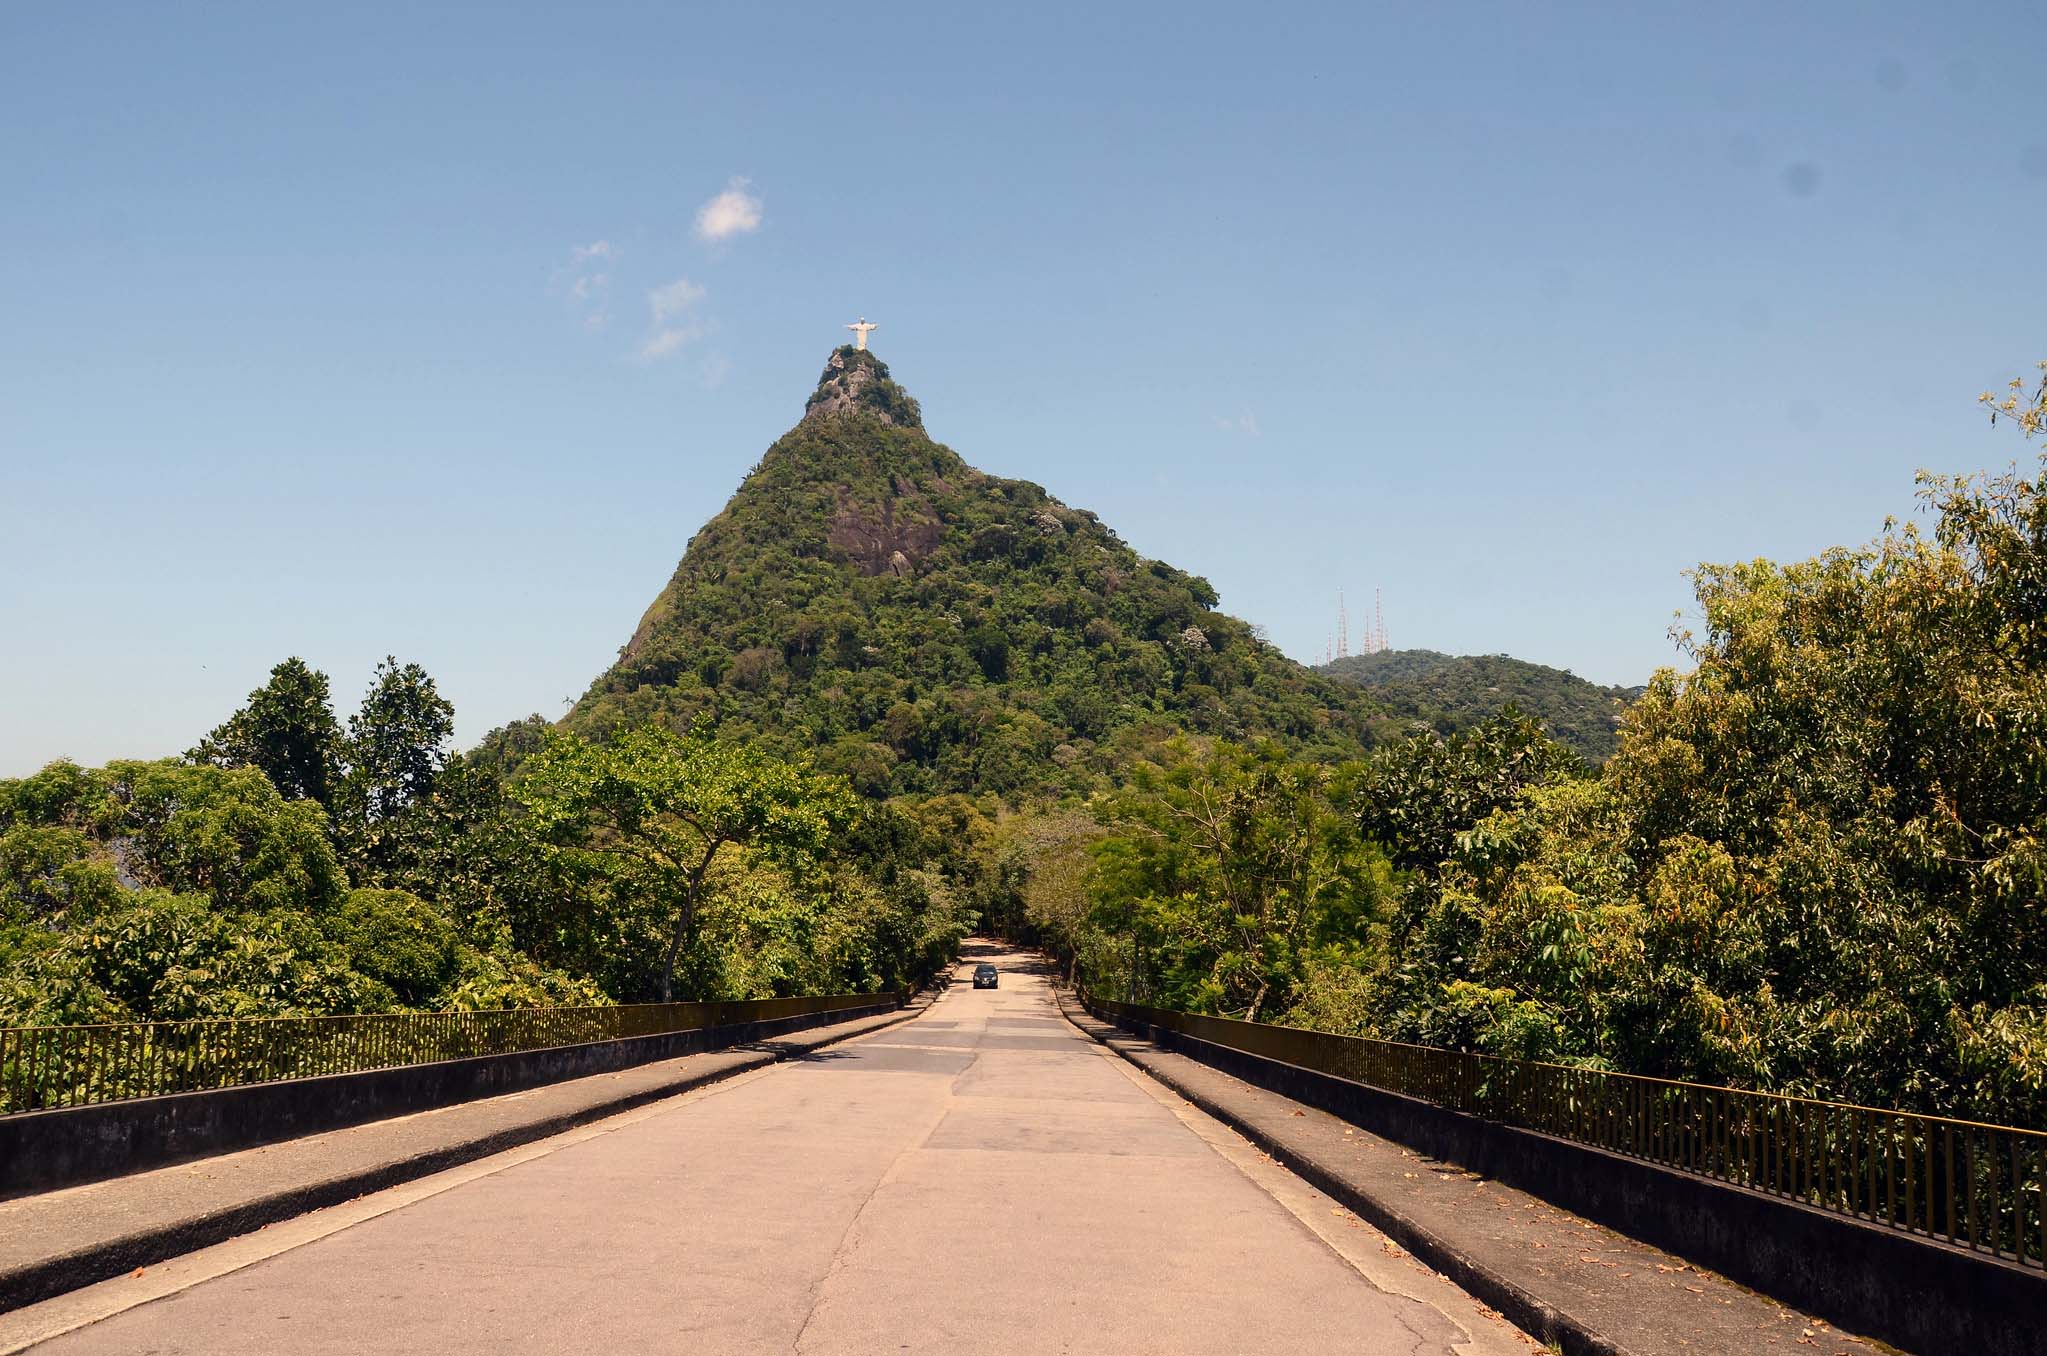 Driving toward Rio de Janeiro's Christ the Redeemer statue, surrounded by dense forest